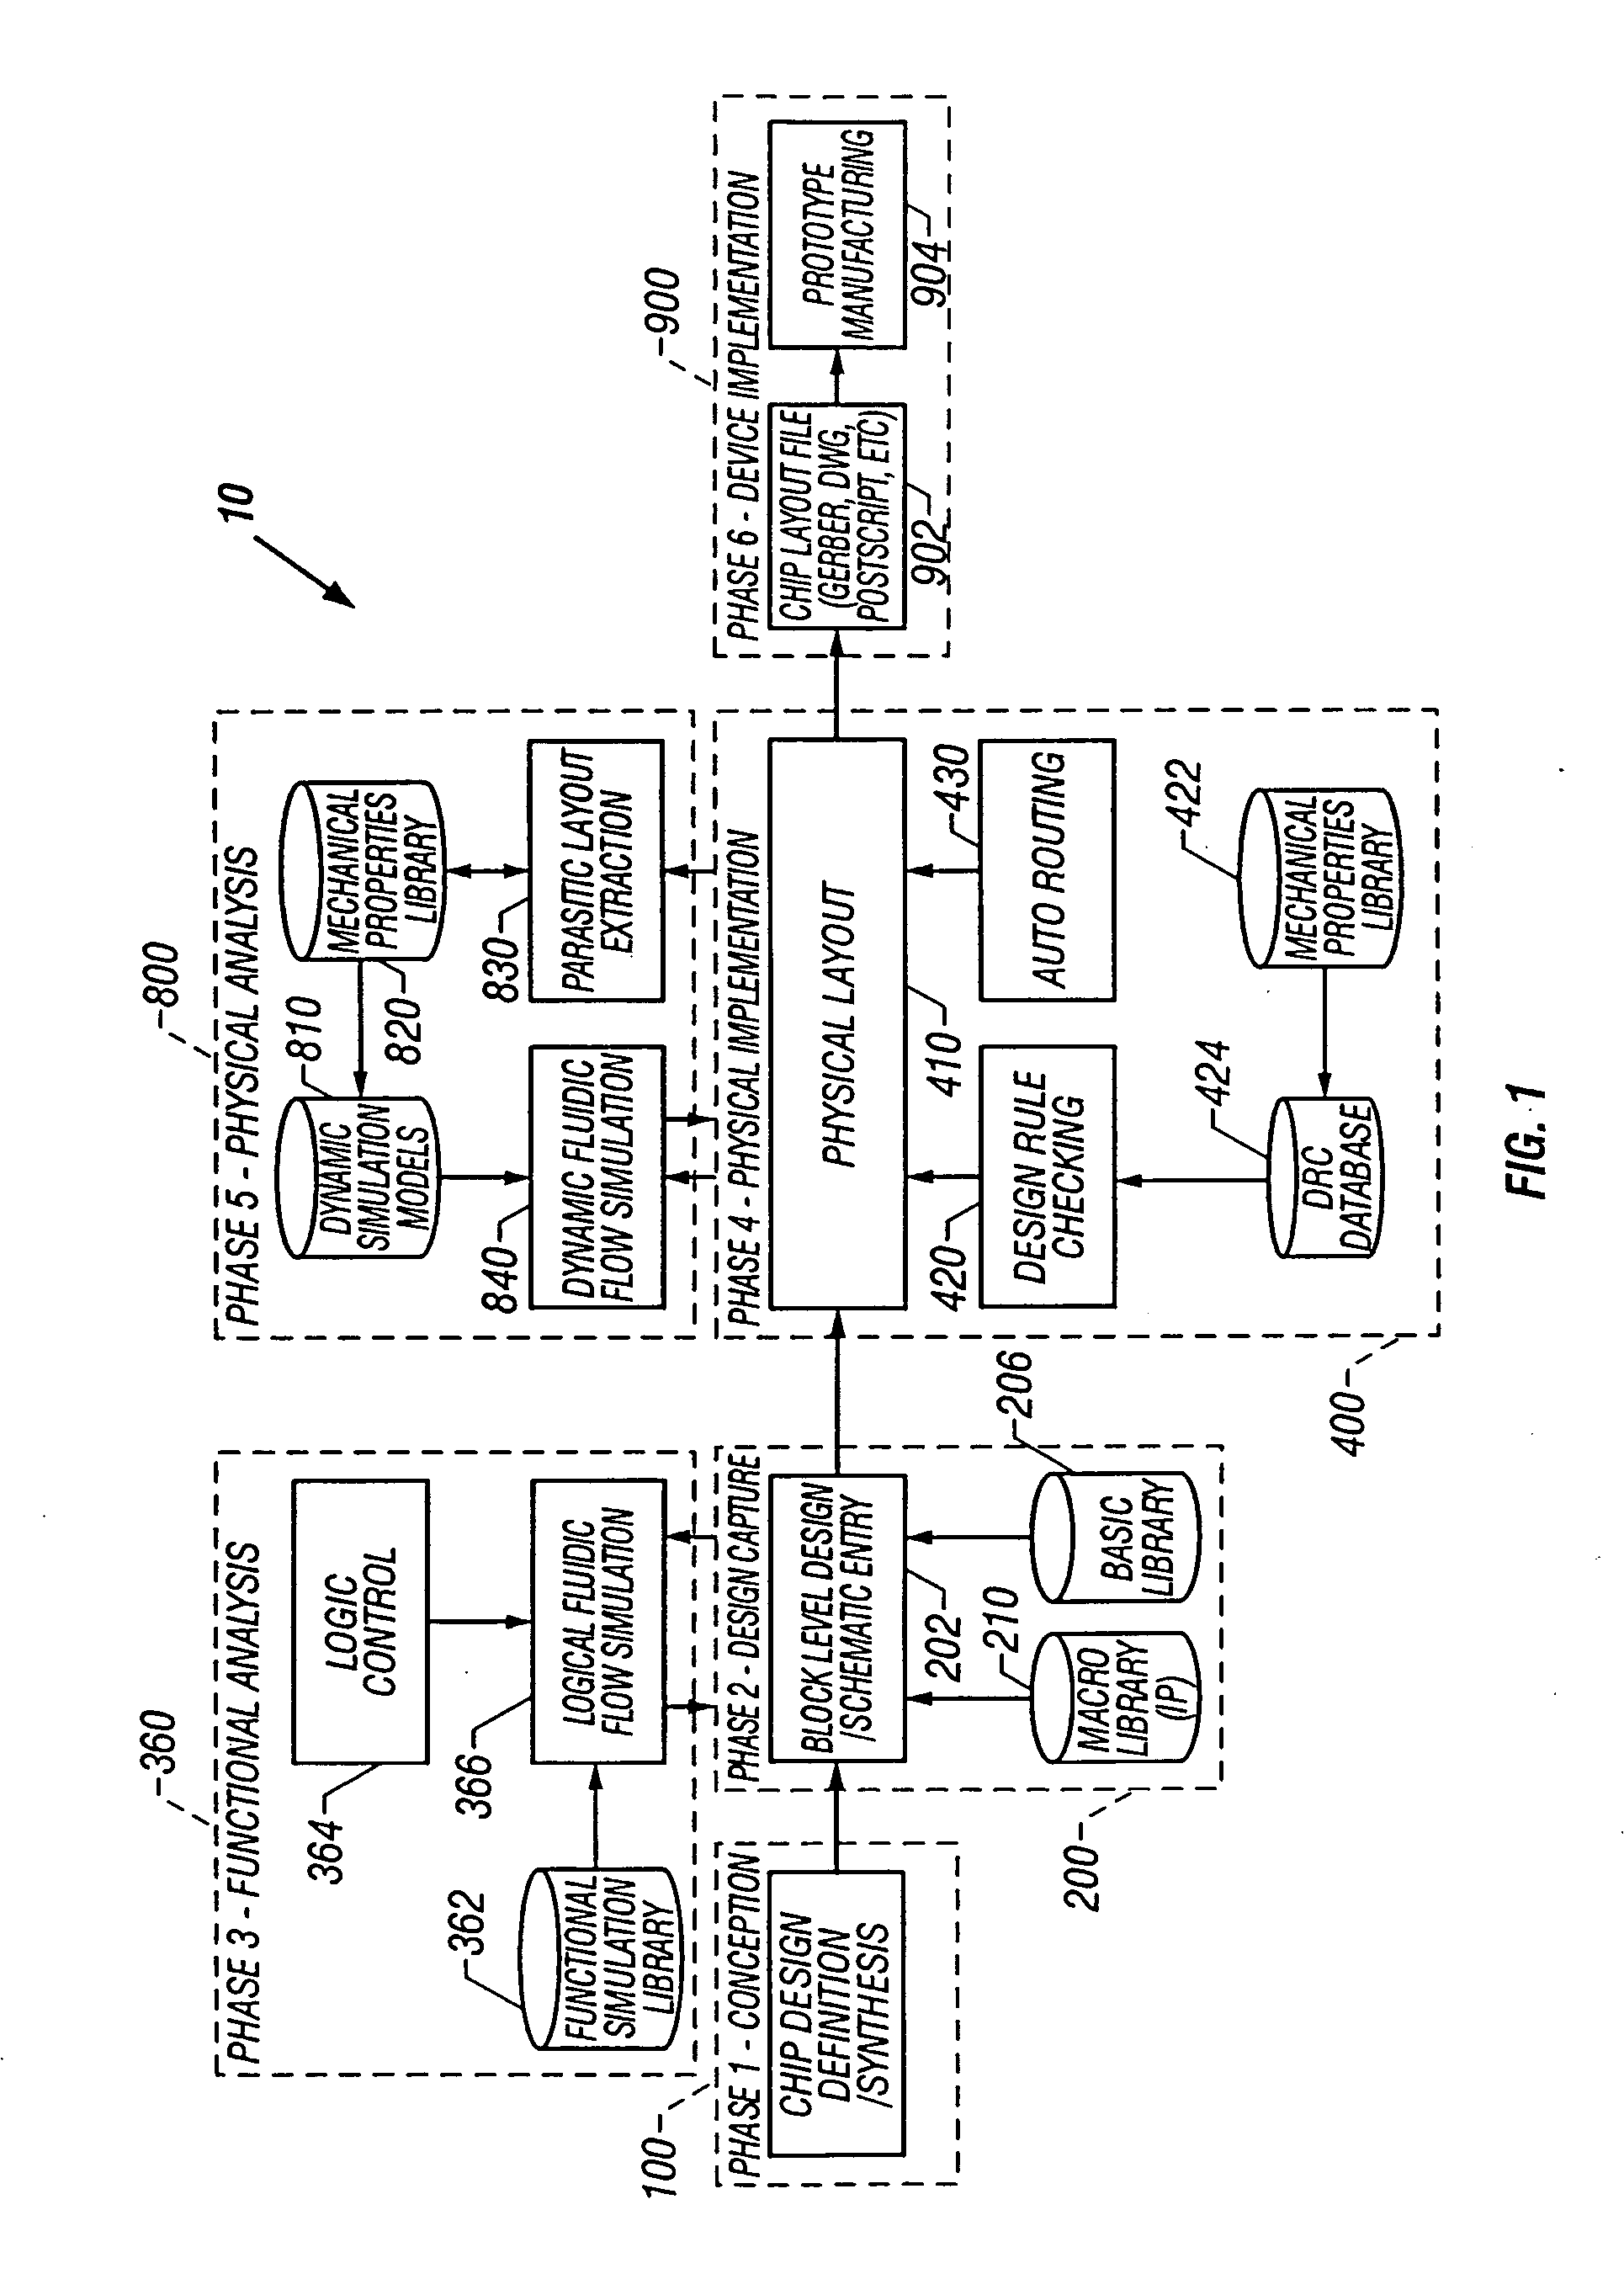 Microfluidic design automation method and system